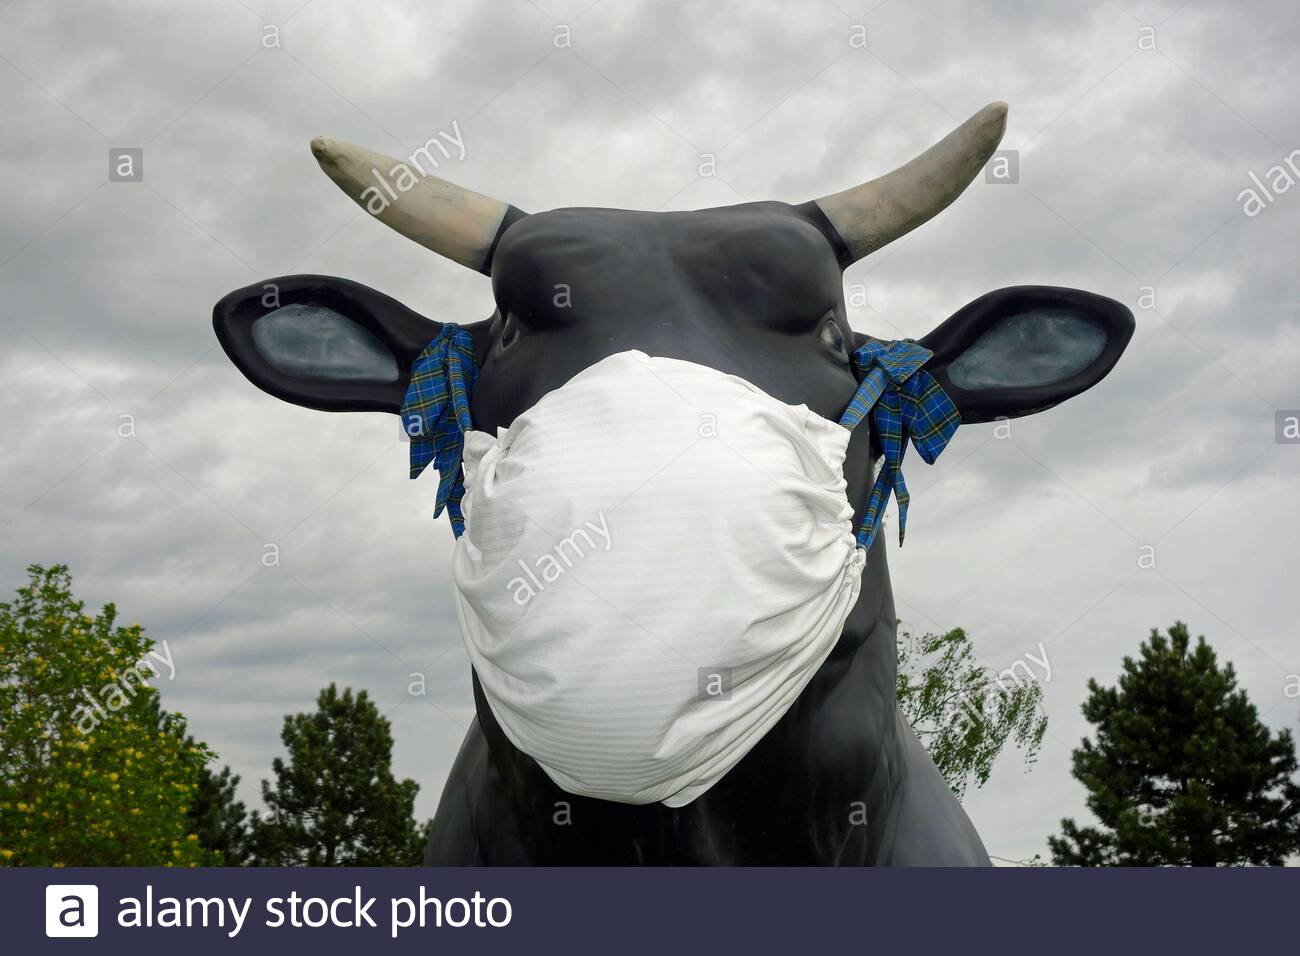 bull-with-surgical-mask-on-2C0MB53.jpg